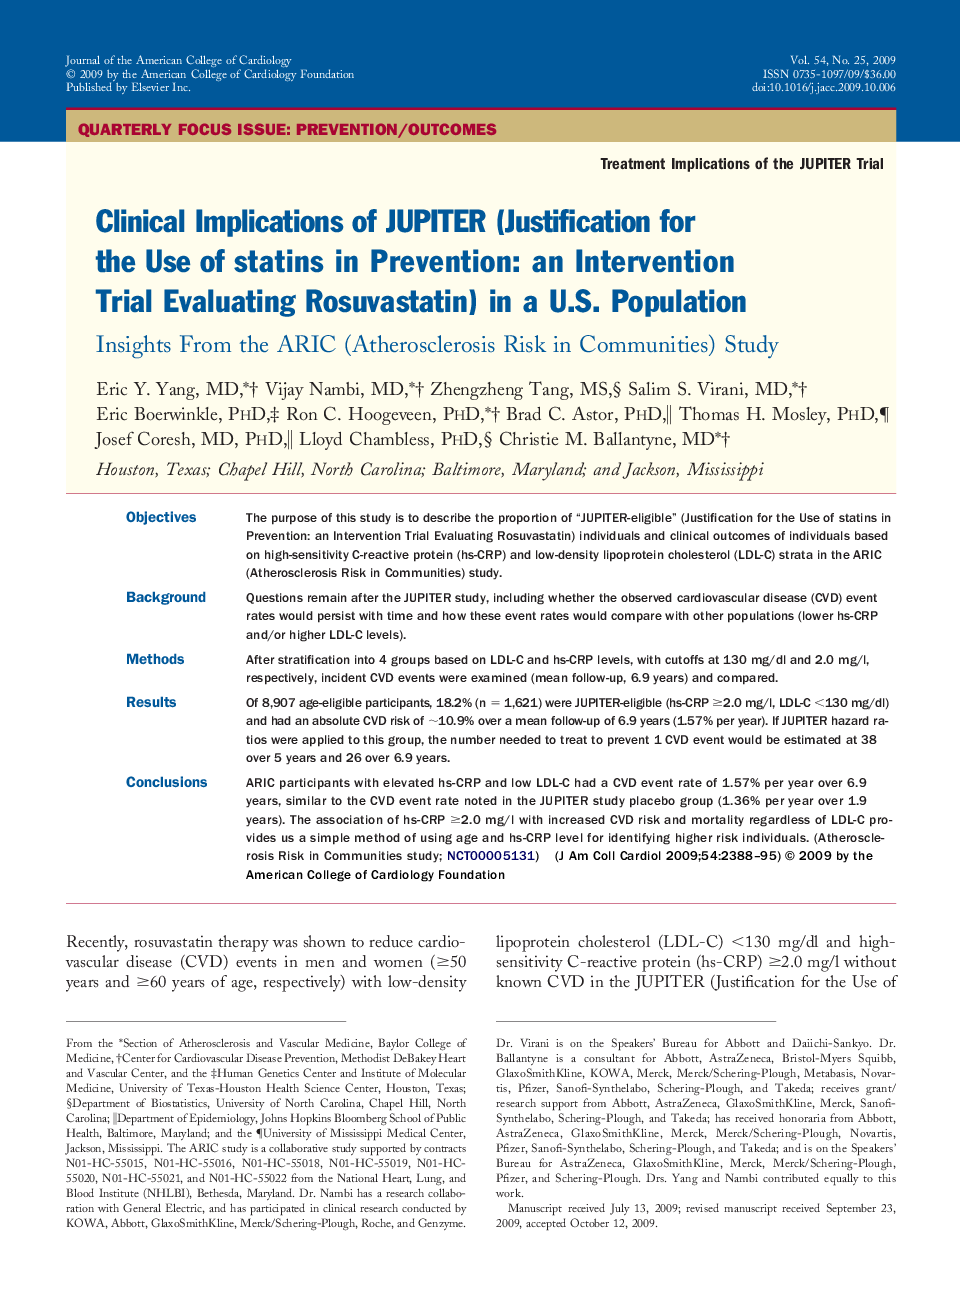 Clinical Implications of JUPITER (Justification for the Use of statins in Prevention: an Intervention Trial Evaluating Rosuvastatin) in a U.S. Population : Insights From the ARIC (Atherosclerosis Risk in Communities) Study